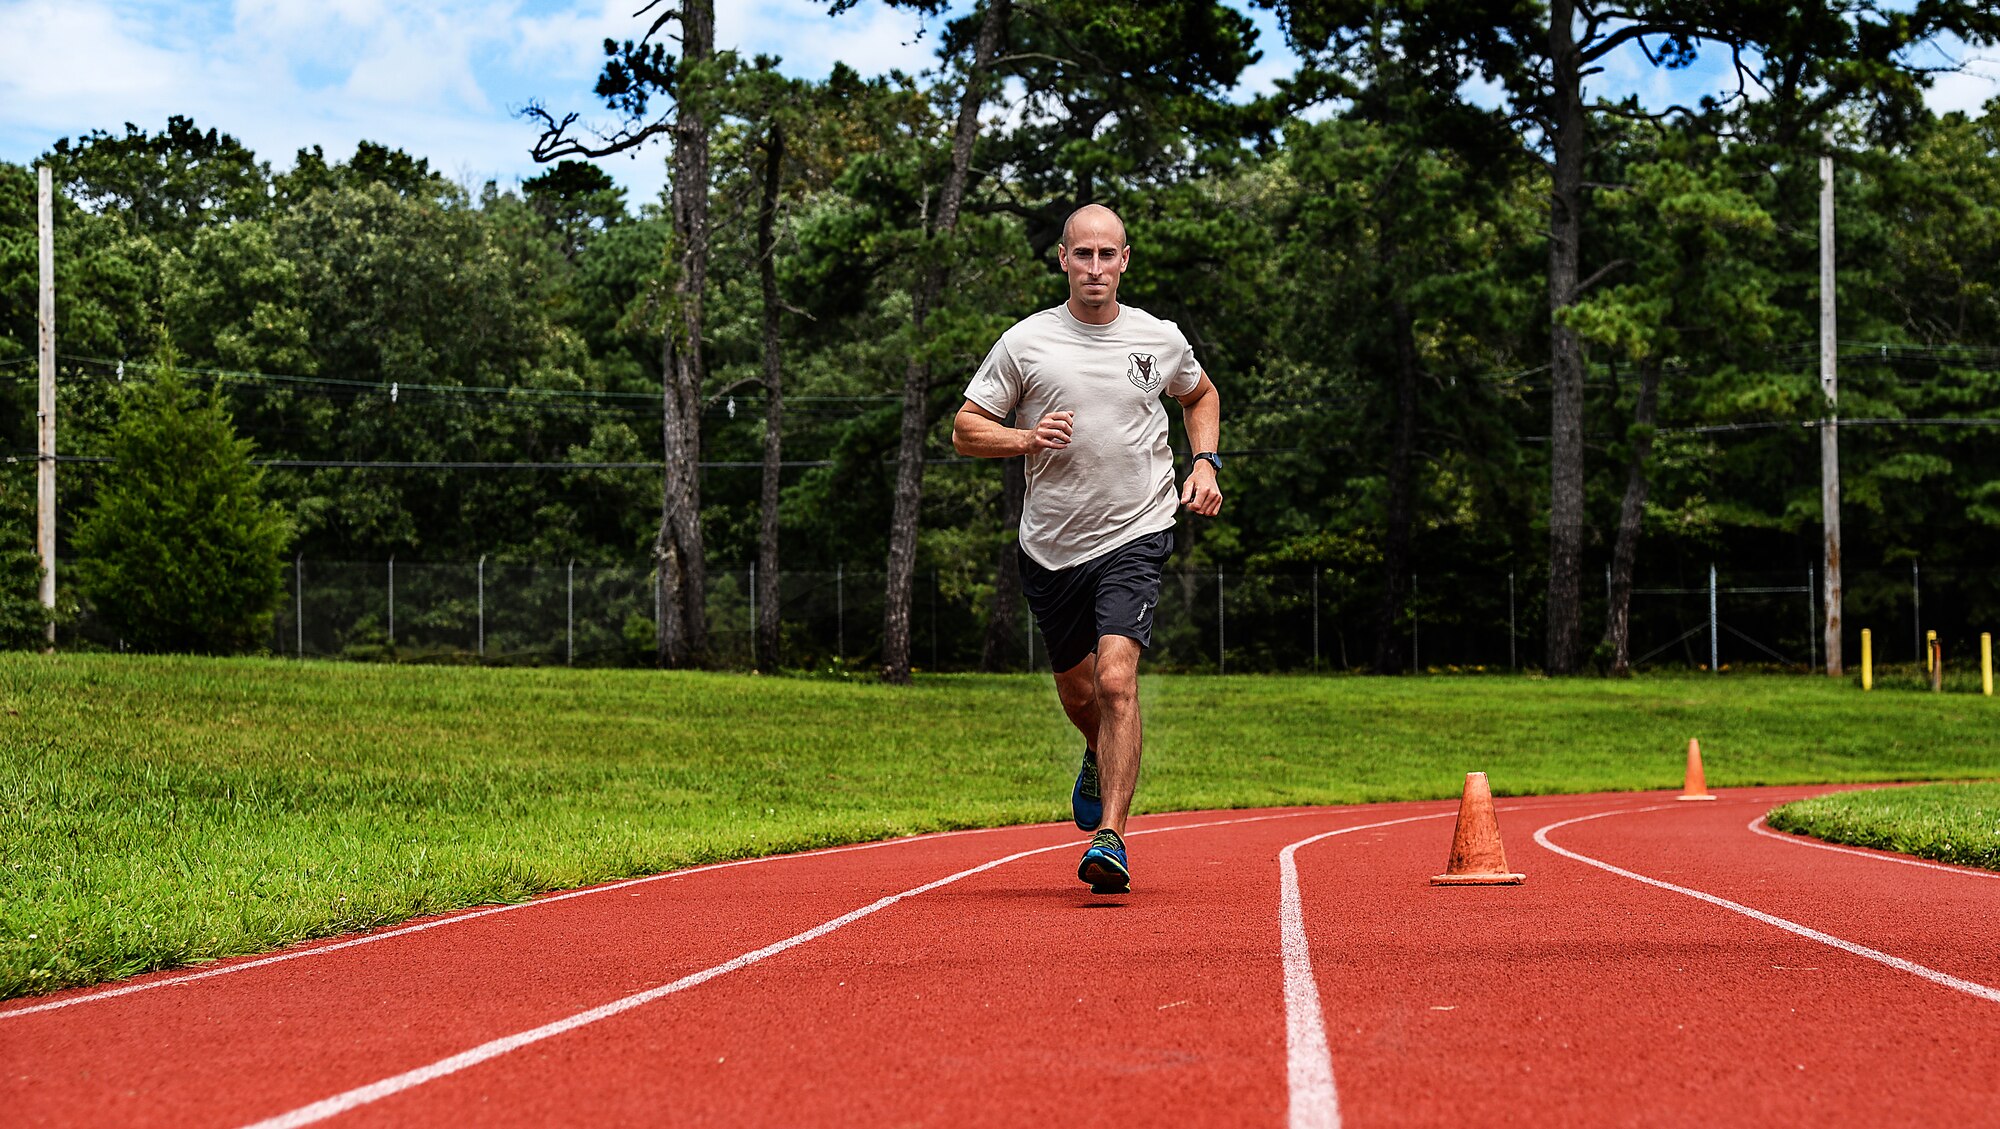 A picture of U.S. Air Force Staff Sgt. Mark A. Perna, a pavements and construction equipment journeyman with the 177th Civil Engineer Squadron, running on the base track.